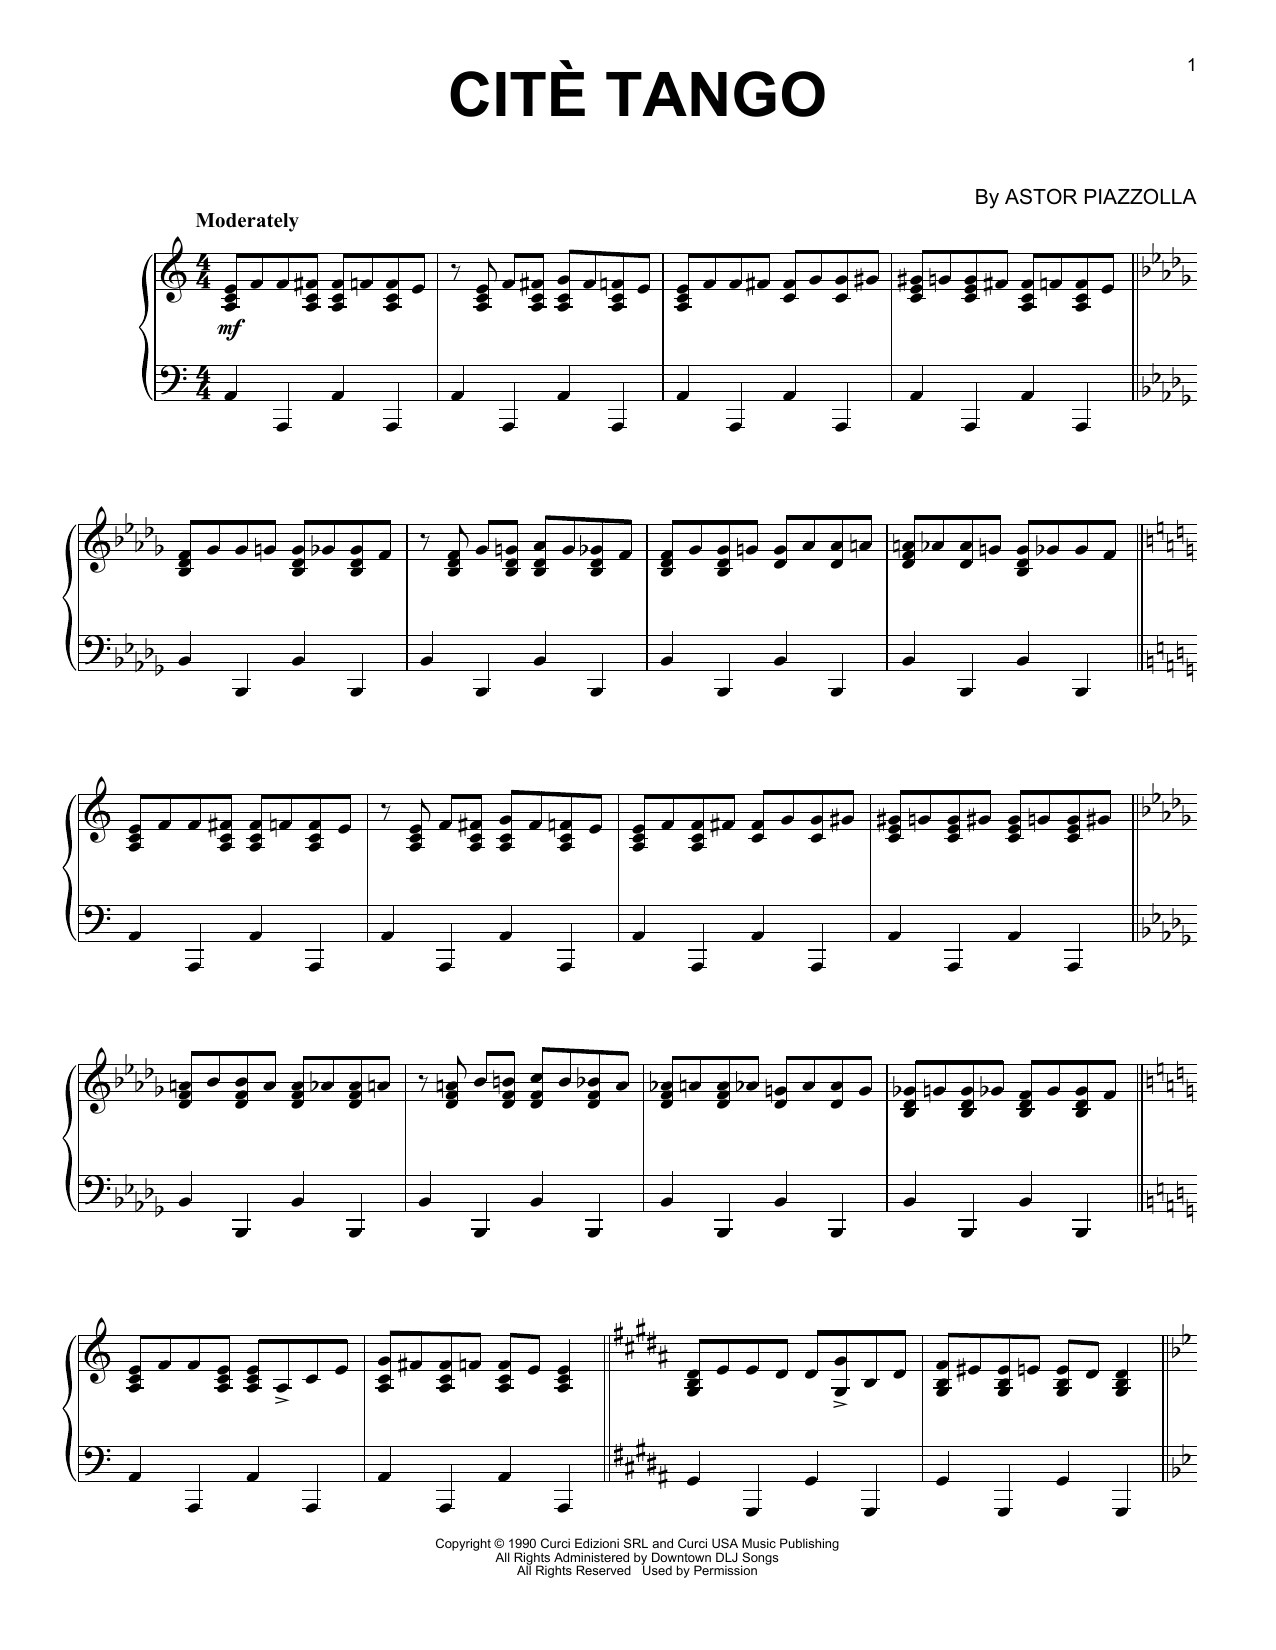 Astor Piazzolla Cite Tango sheet music notes and chords. Download Printable PDF.